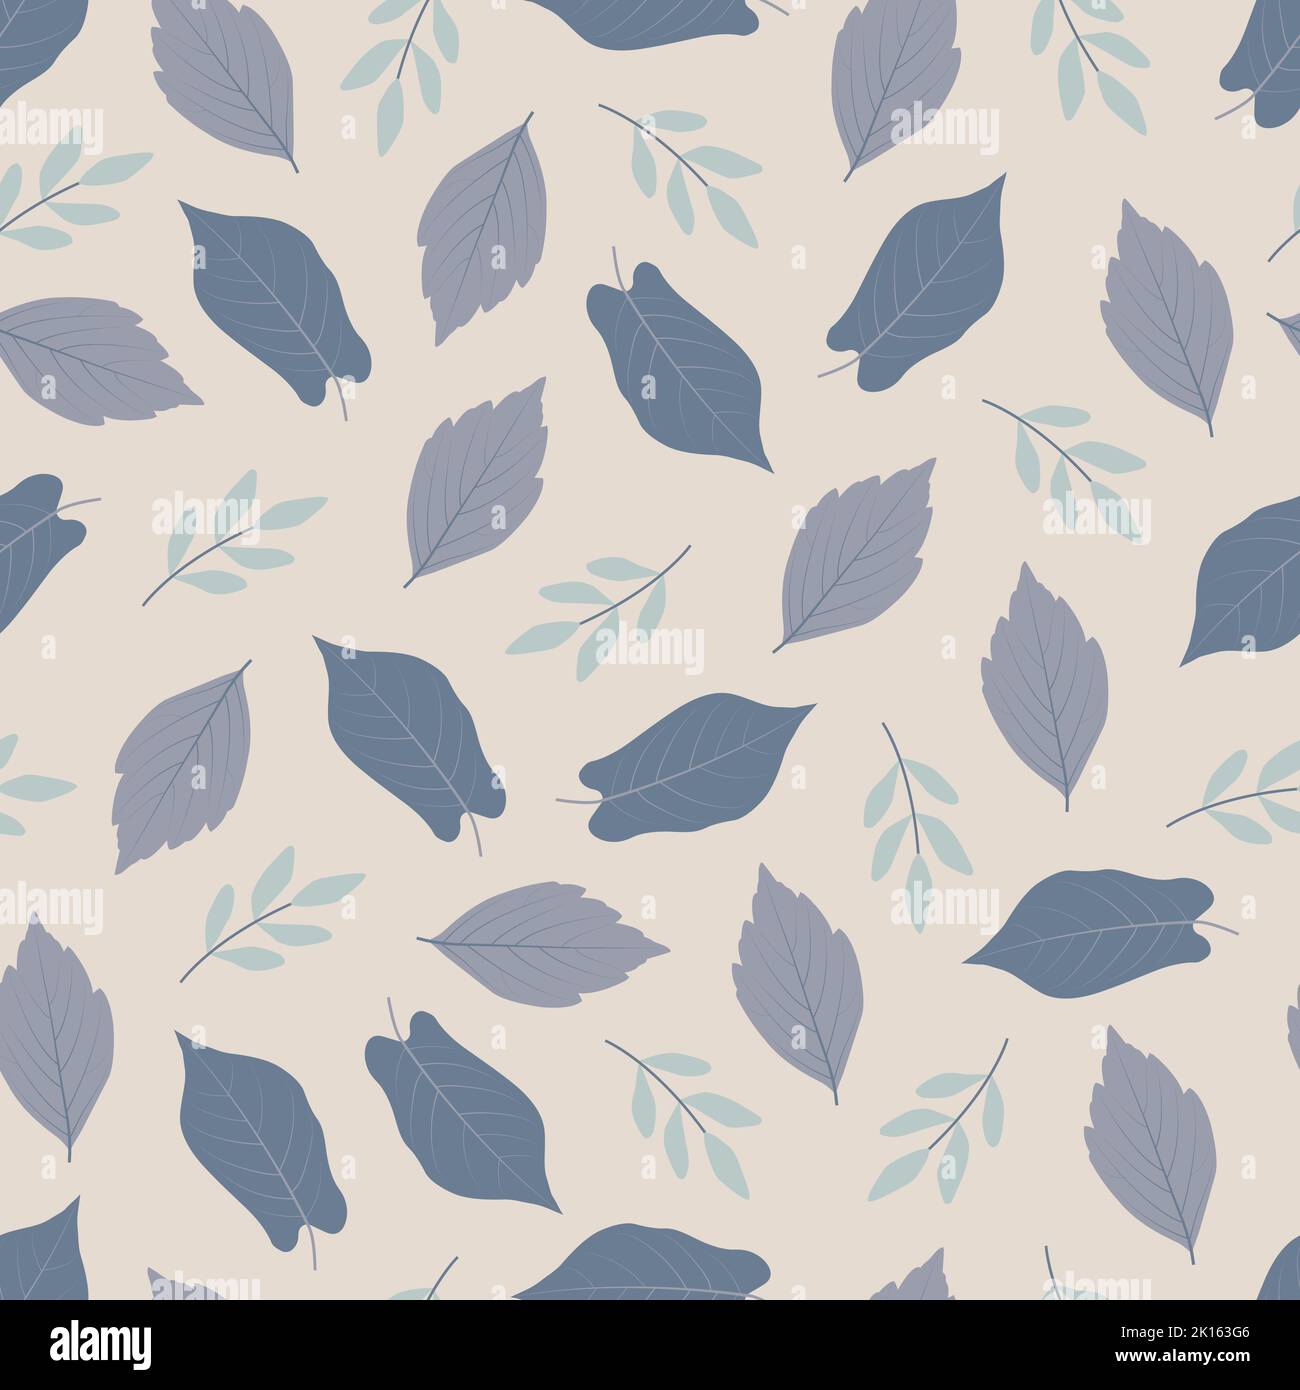 Elegant trendy floral seamless pattern design of branches and leaves. Foliage repeat texture background for textile and printing Stock Vector